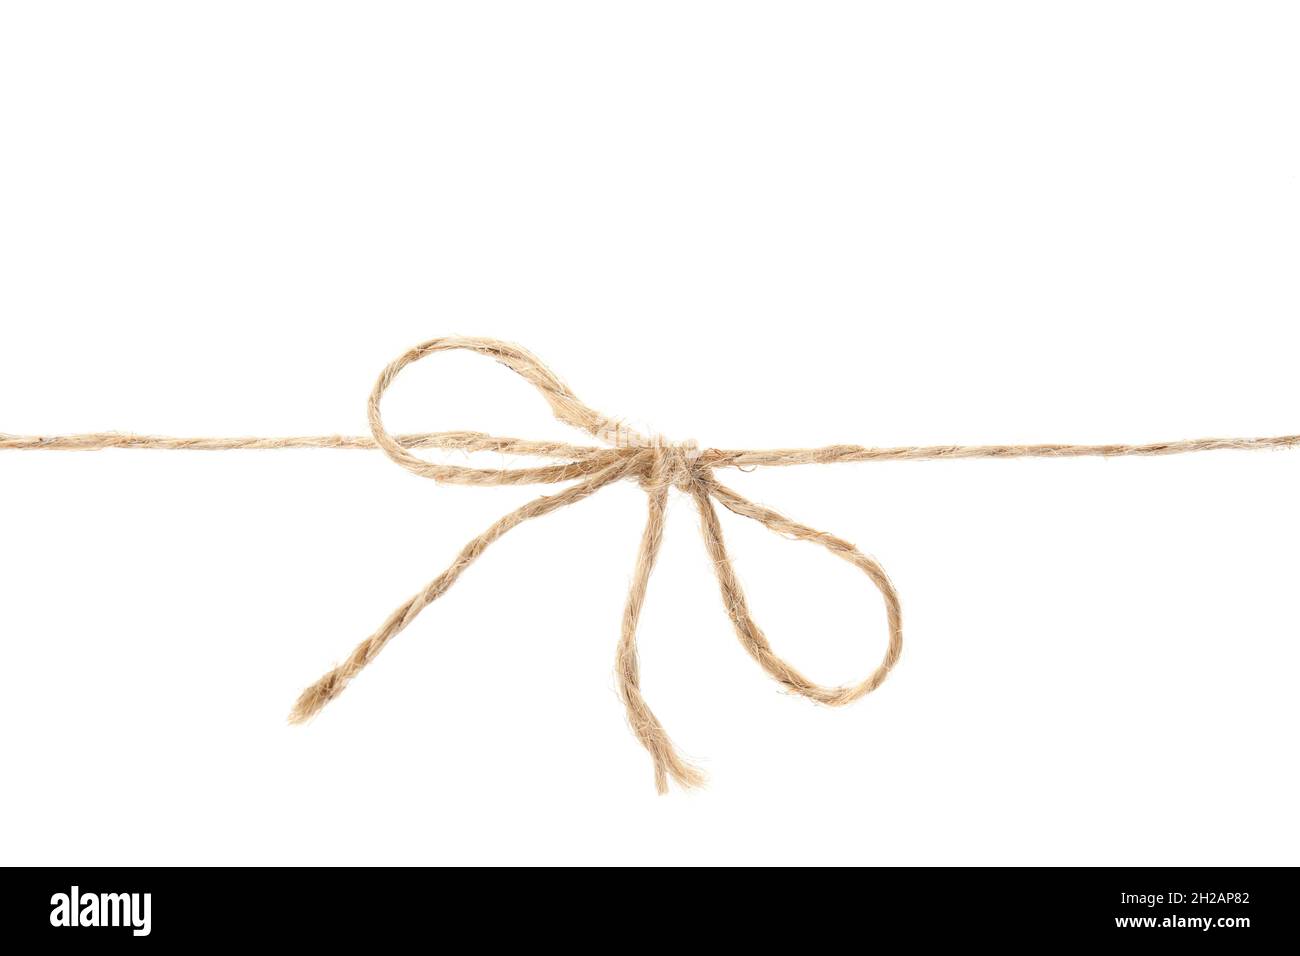 https://c8.alamy.com/comp/2H2AP82/hemp-rope-with-bow-knot-on-white-background-2H2AP82.jpg